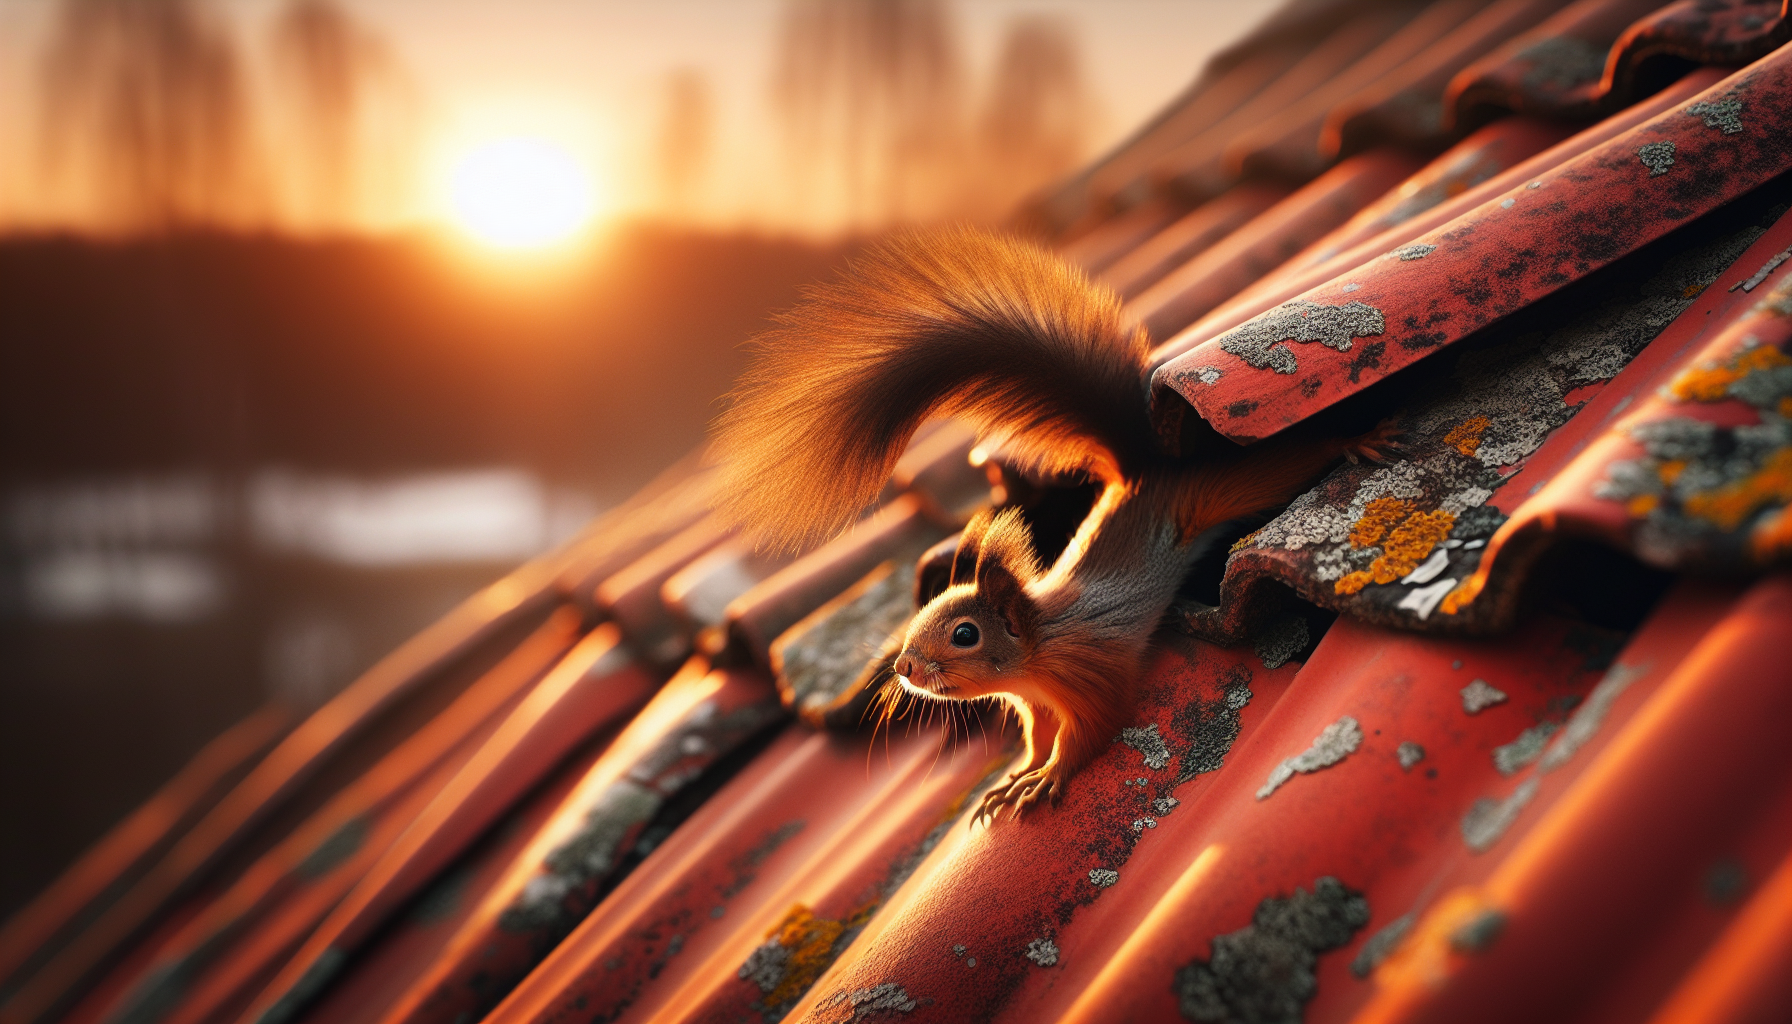 a squirrel is sitting on the roof of a building at sunset.